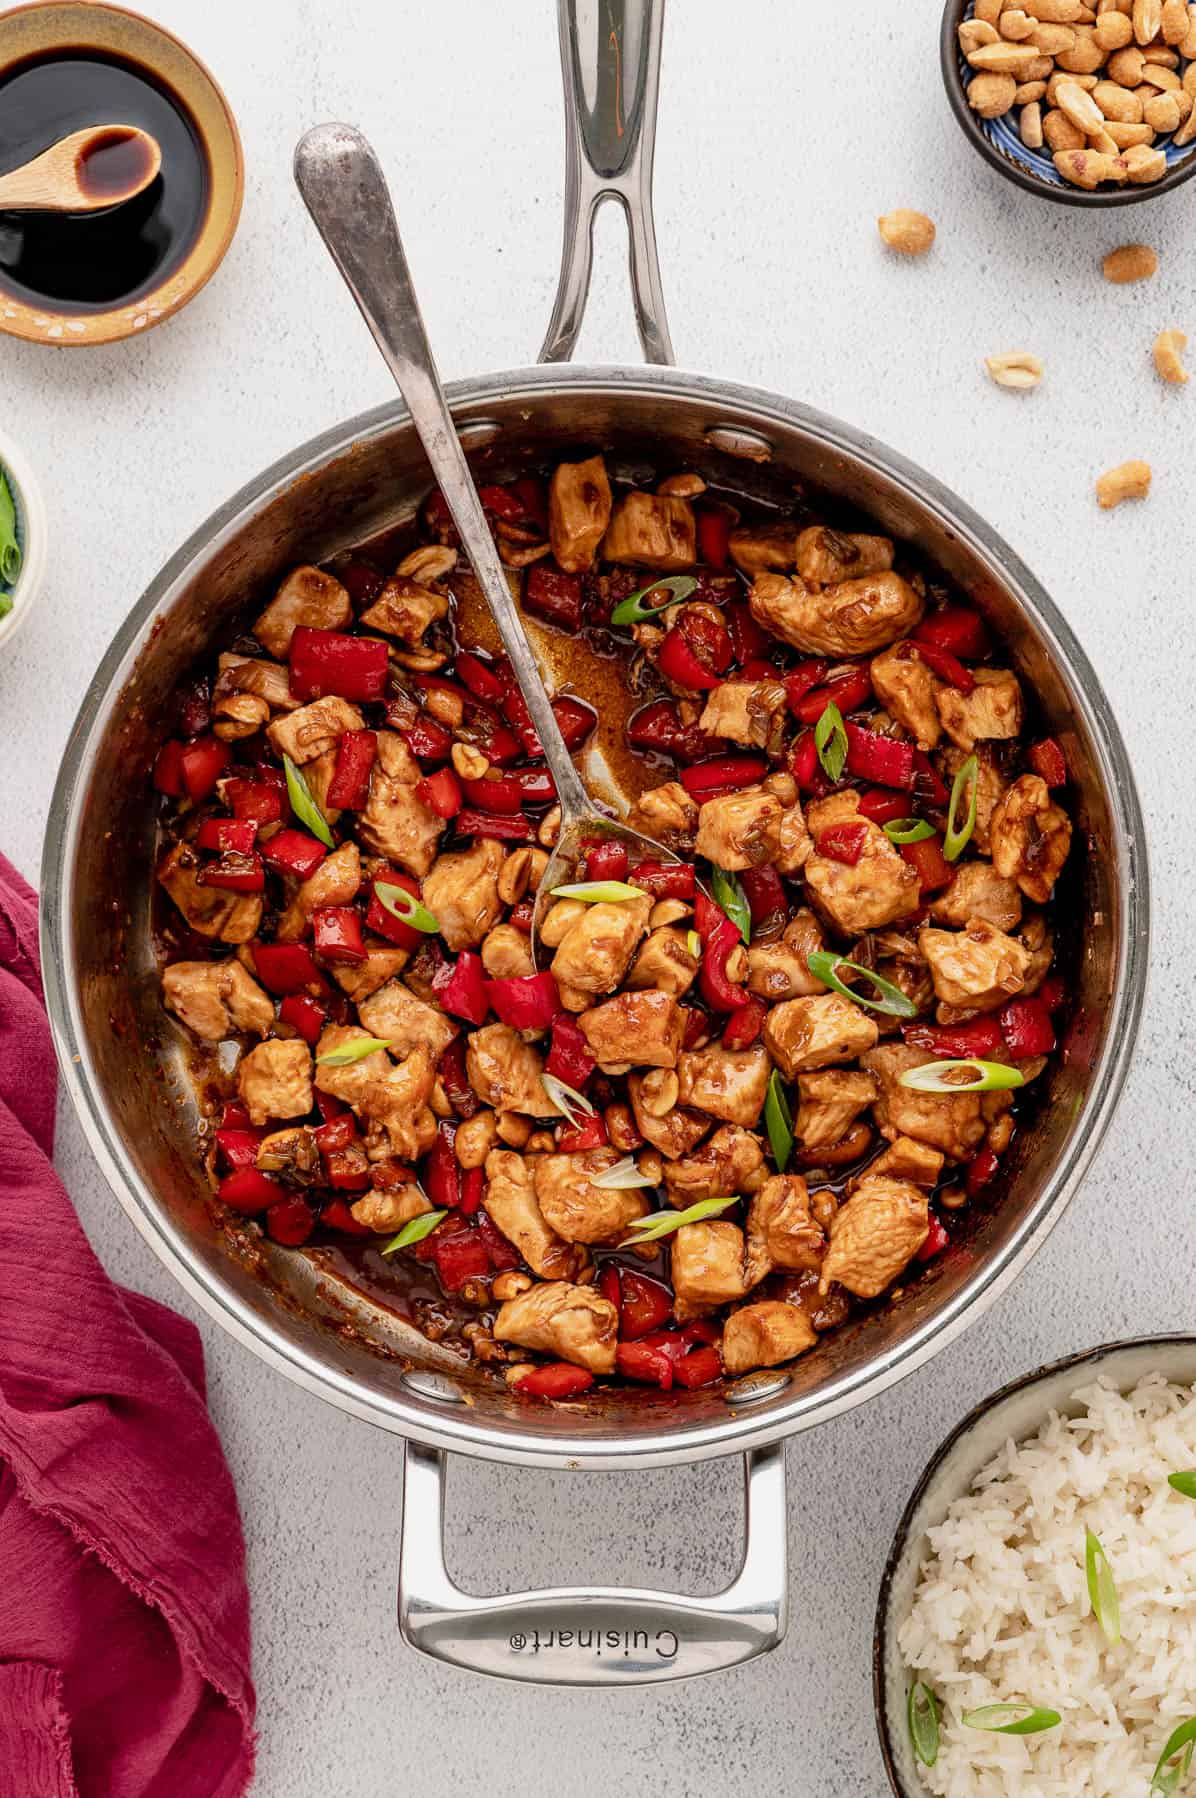 kung pao chicken in a stainless steel saute pan